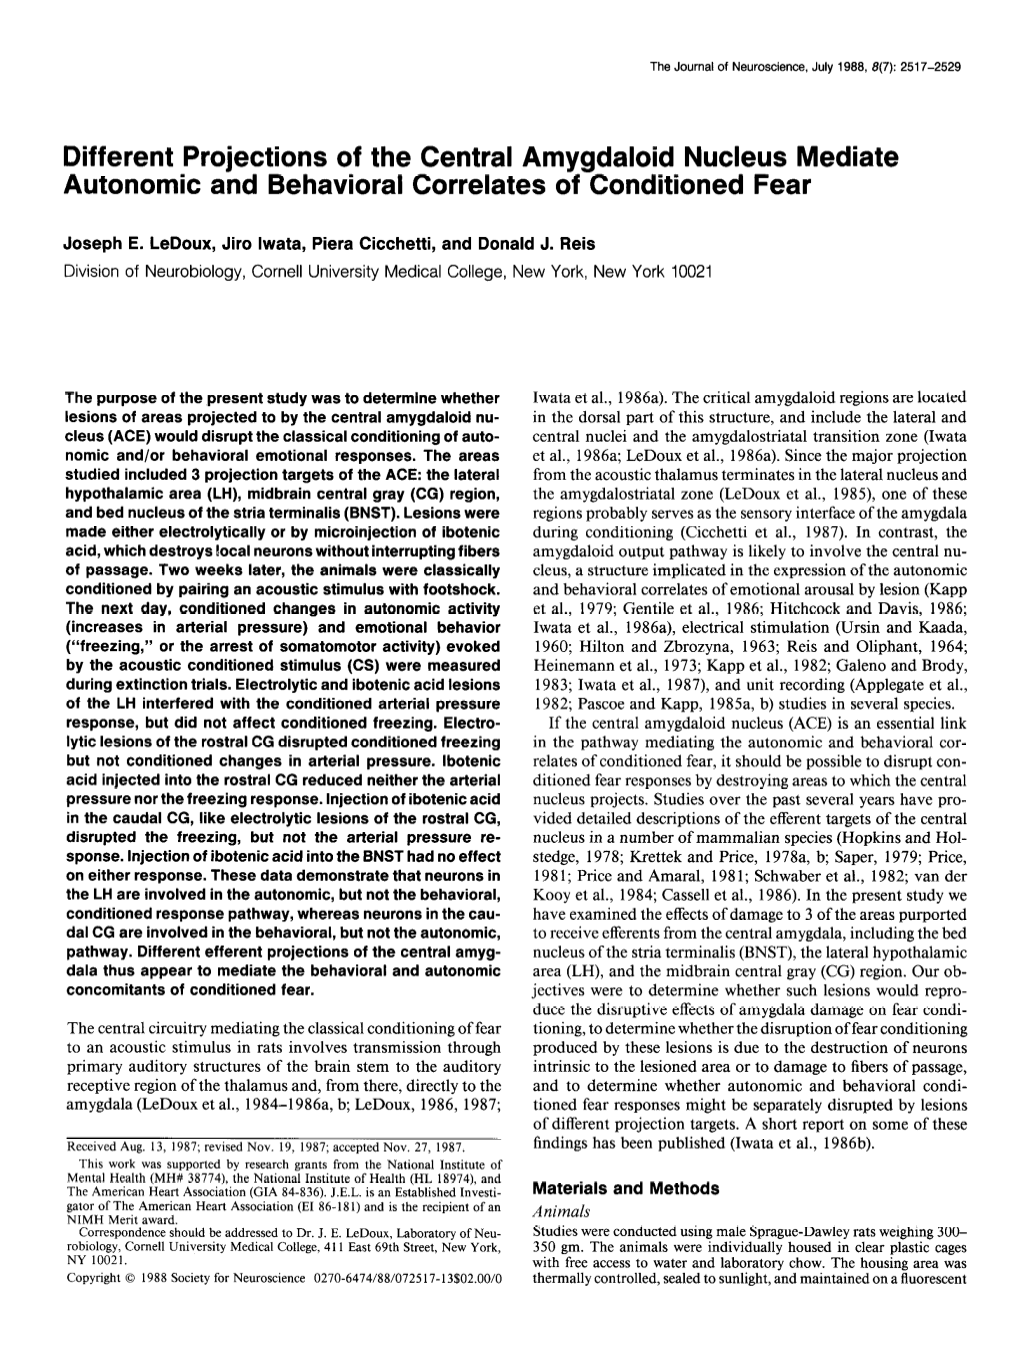 Different Projections of the Central Amygdaloid Nucleus Mediate Autonomic and Behavioral Correlates of Conditioned Fear